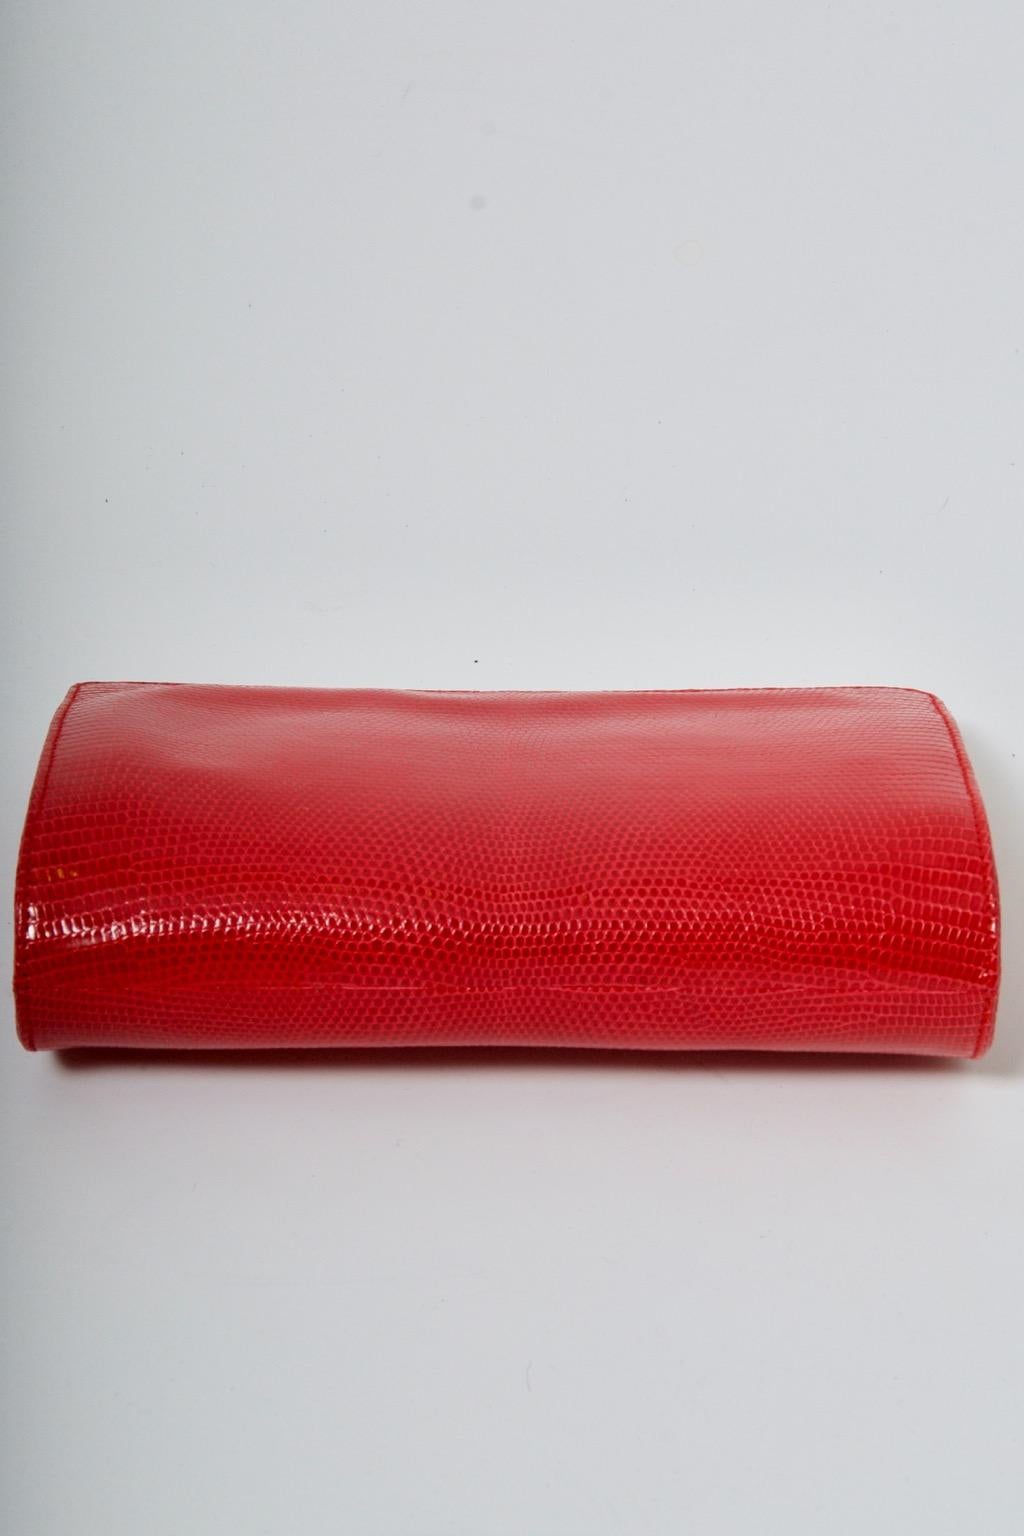 Suarez Red Lizard Covertible Clutch In Excellent Condition For Sale In Alford, MA